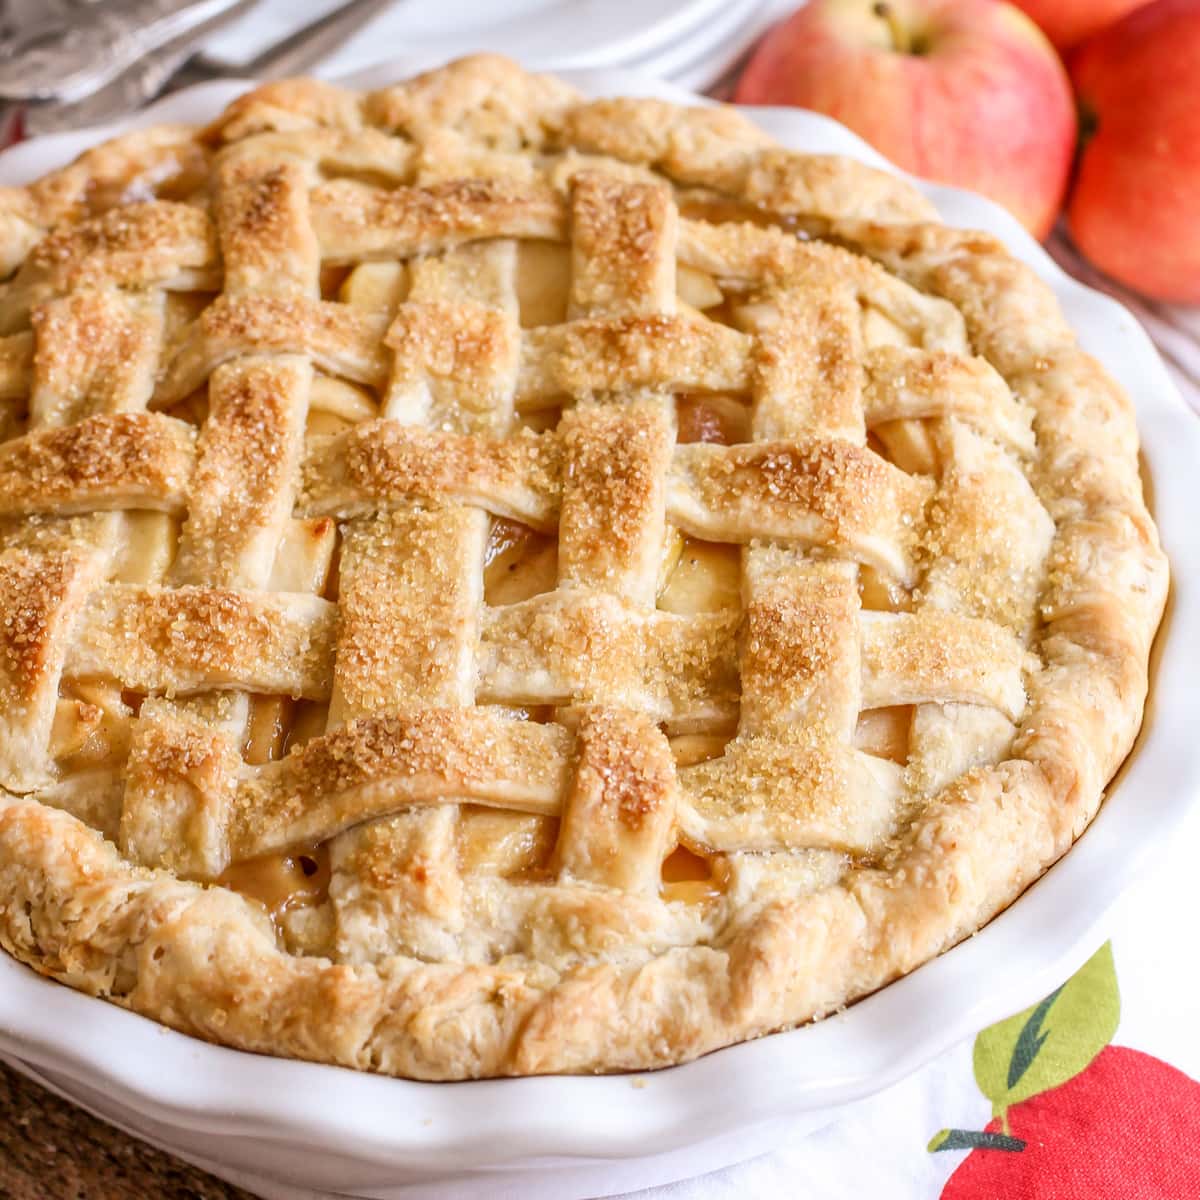 4th of July Desserts - Apple pie with a lattice crust in a white pie dish.